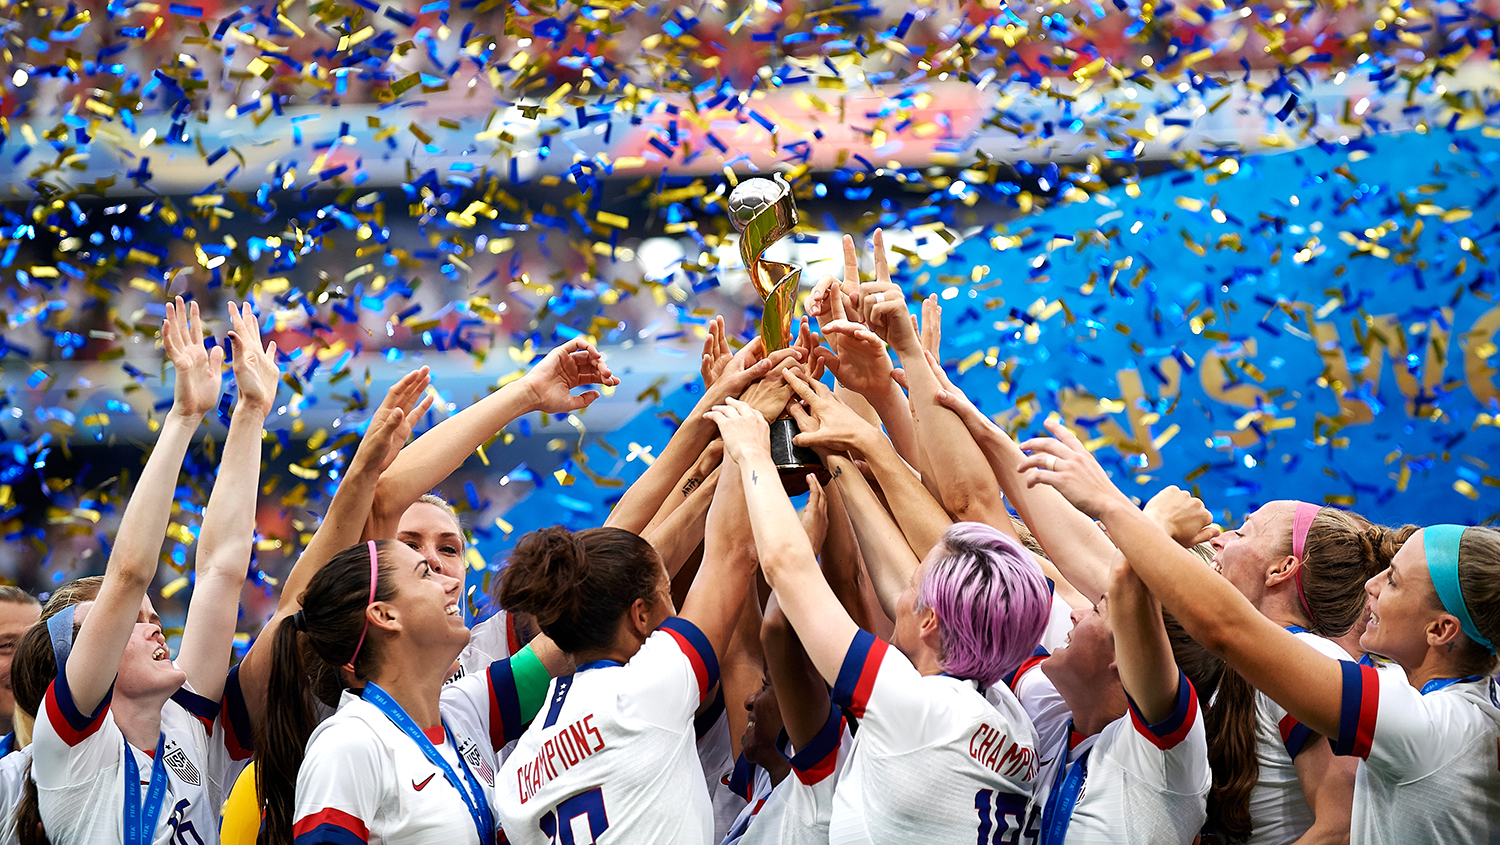 A group of uniformed soccer players gathered and reaching up to touch a trophy as confetti falls.